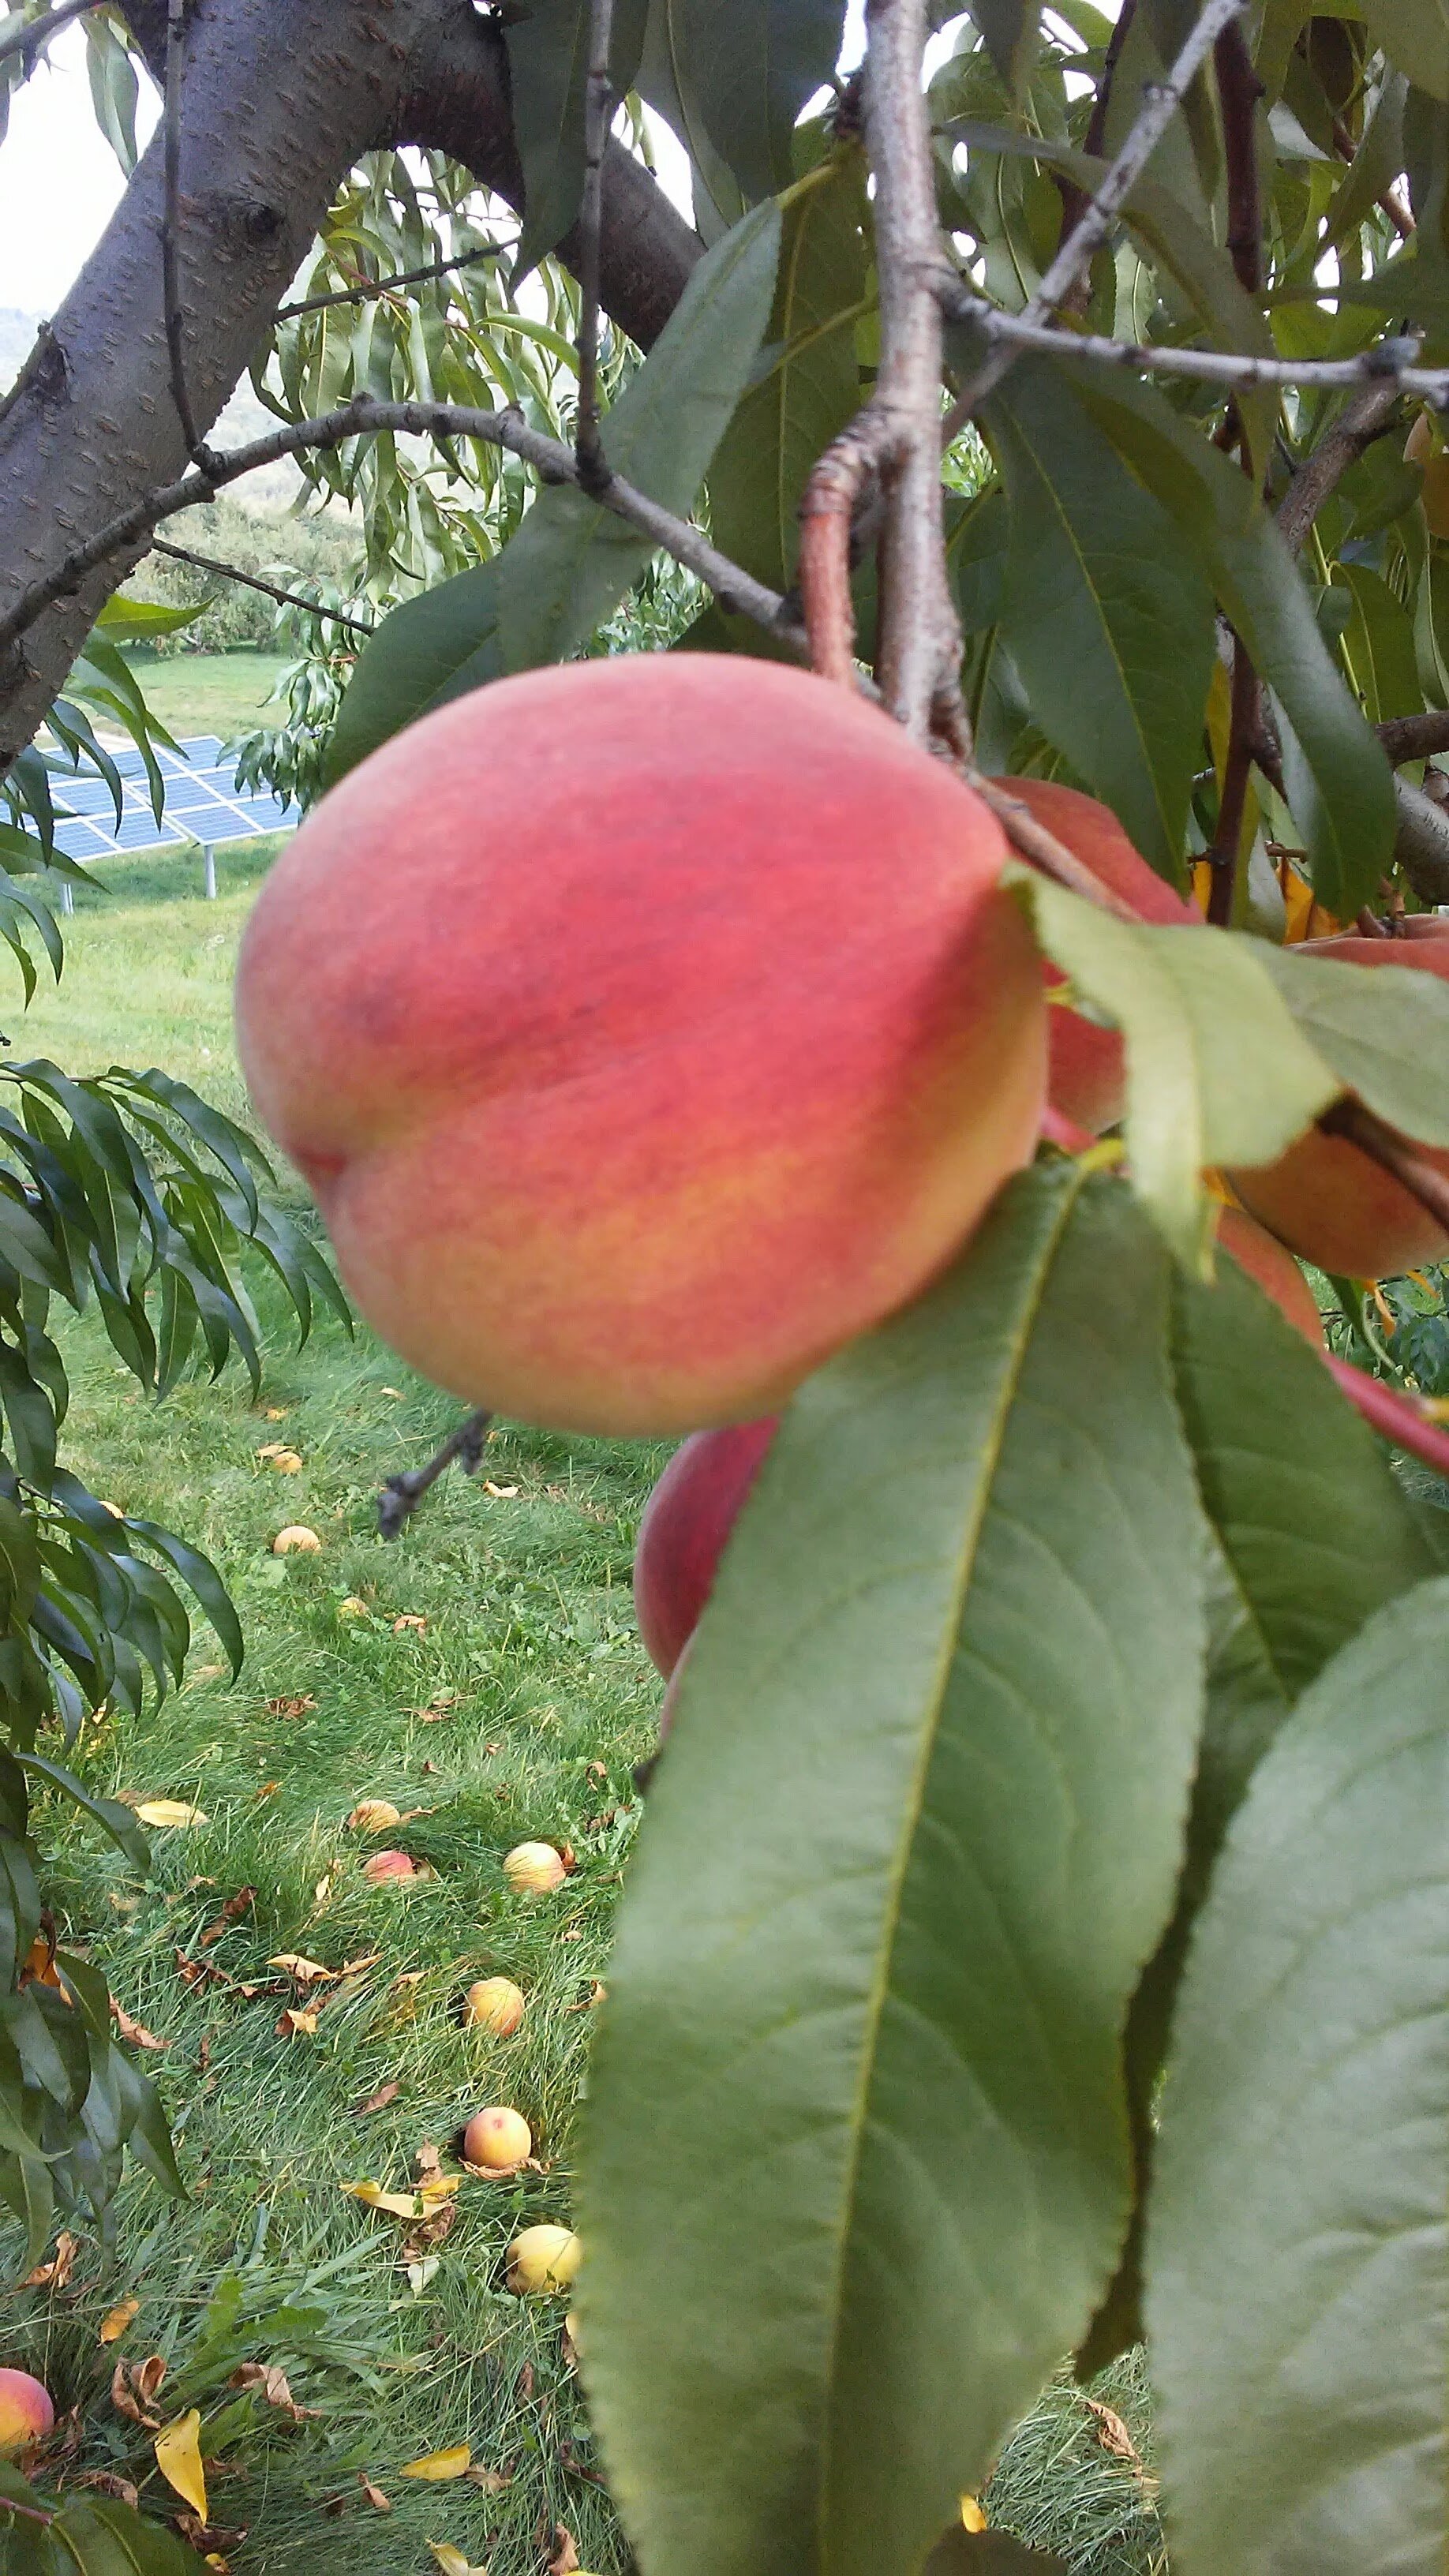 Image of an almost ripe peach on a peach tree.